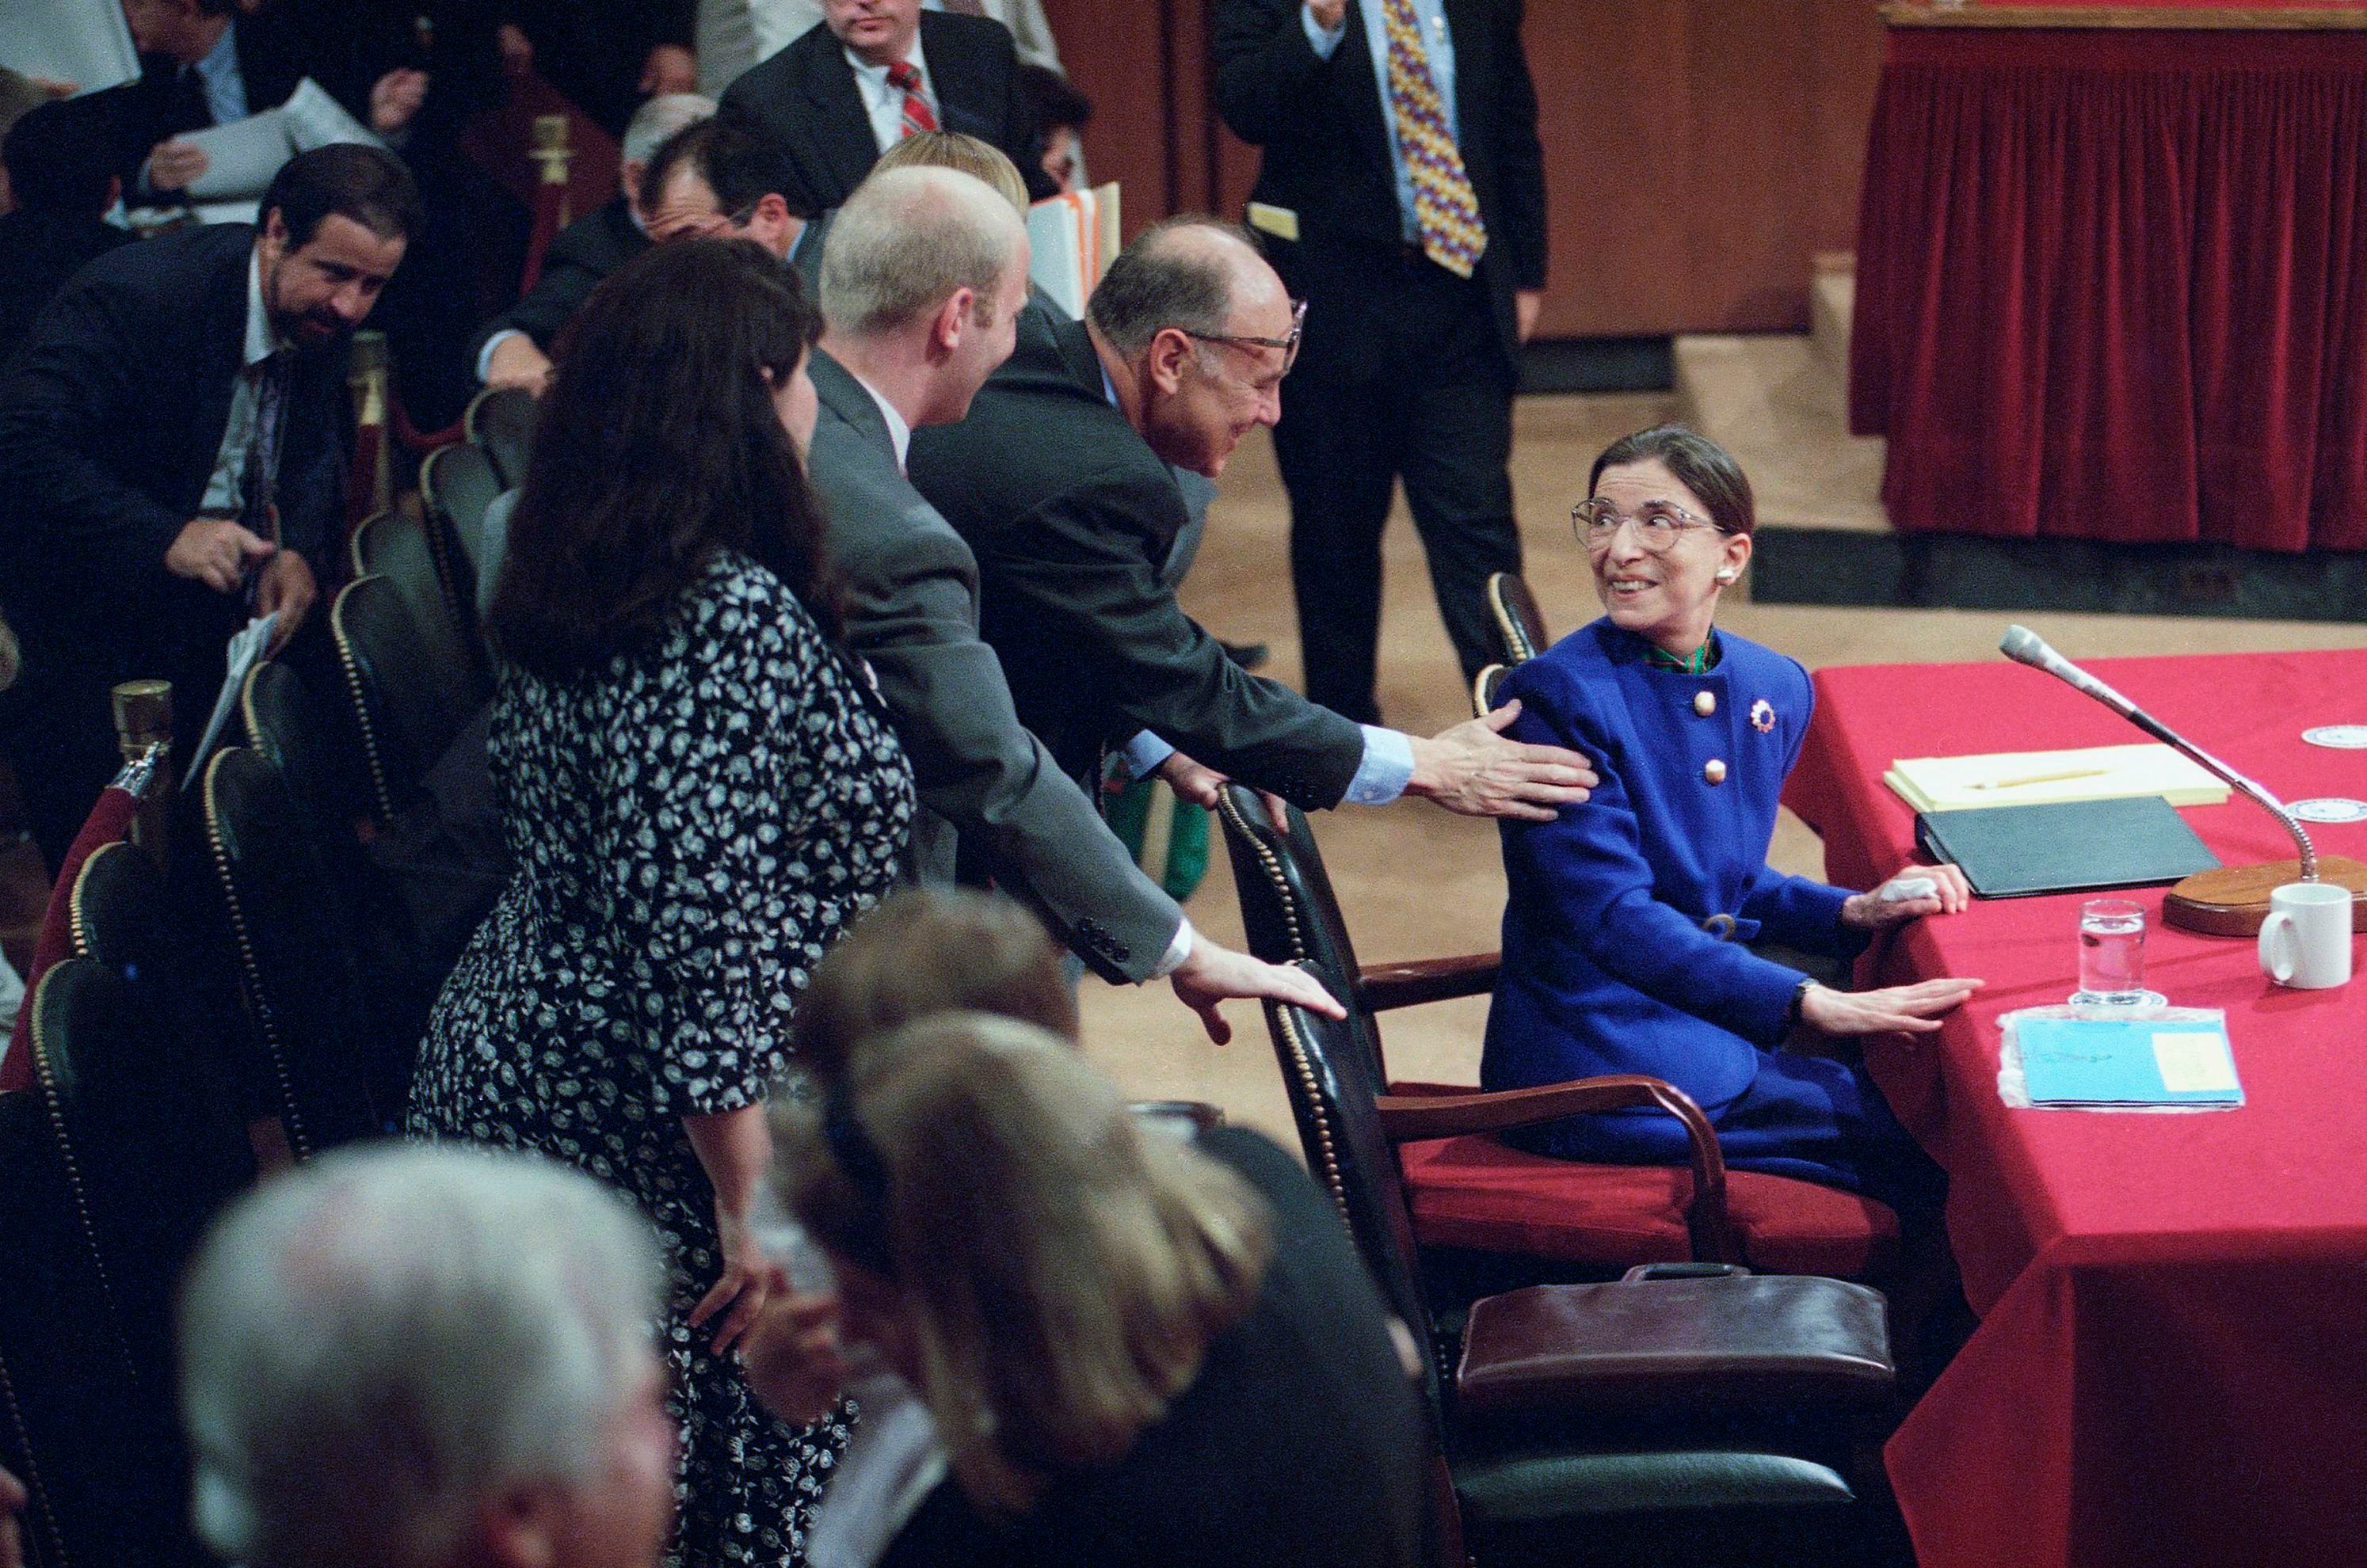 Judge Ruth Bader Ginsburg, then a Supreme Court nominee, is greeted by her husband, Martin, as she introduced her family during her confirmation hearing before the Senate Judiciary Committee on Capitol Hill in Washington on July 20, 1993. (John Duricka—AP/REX/Shutterstock)